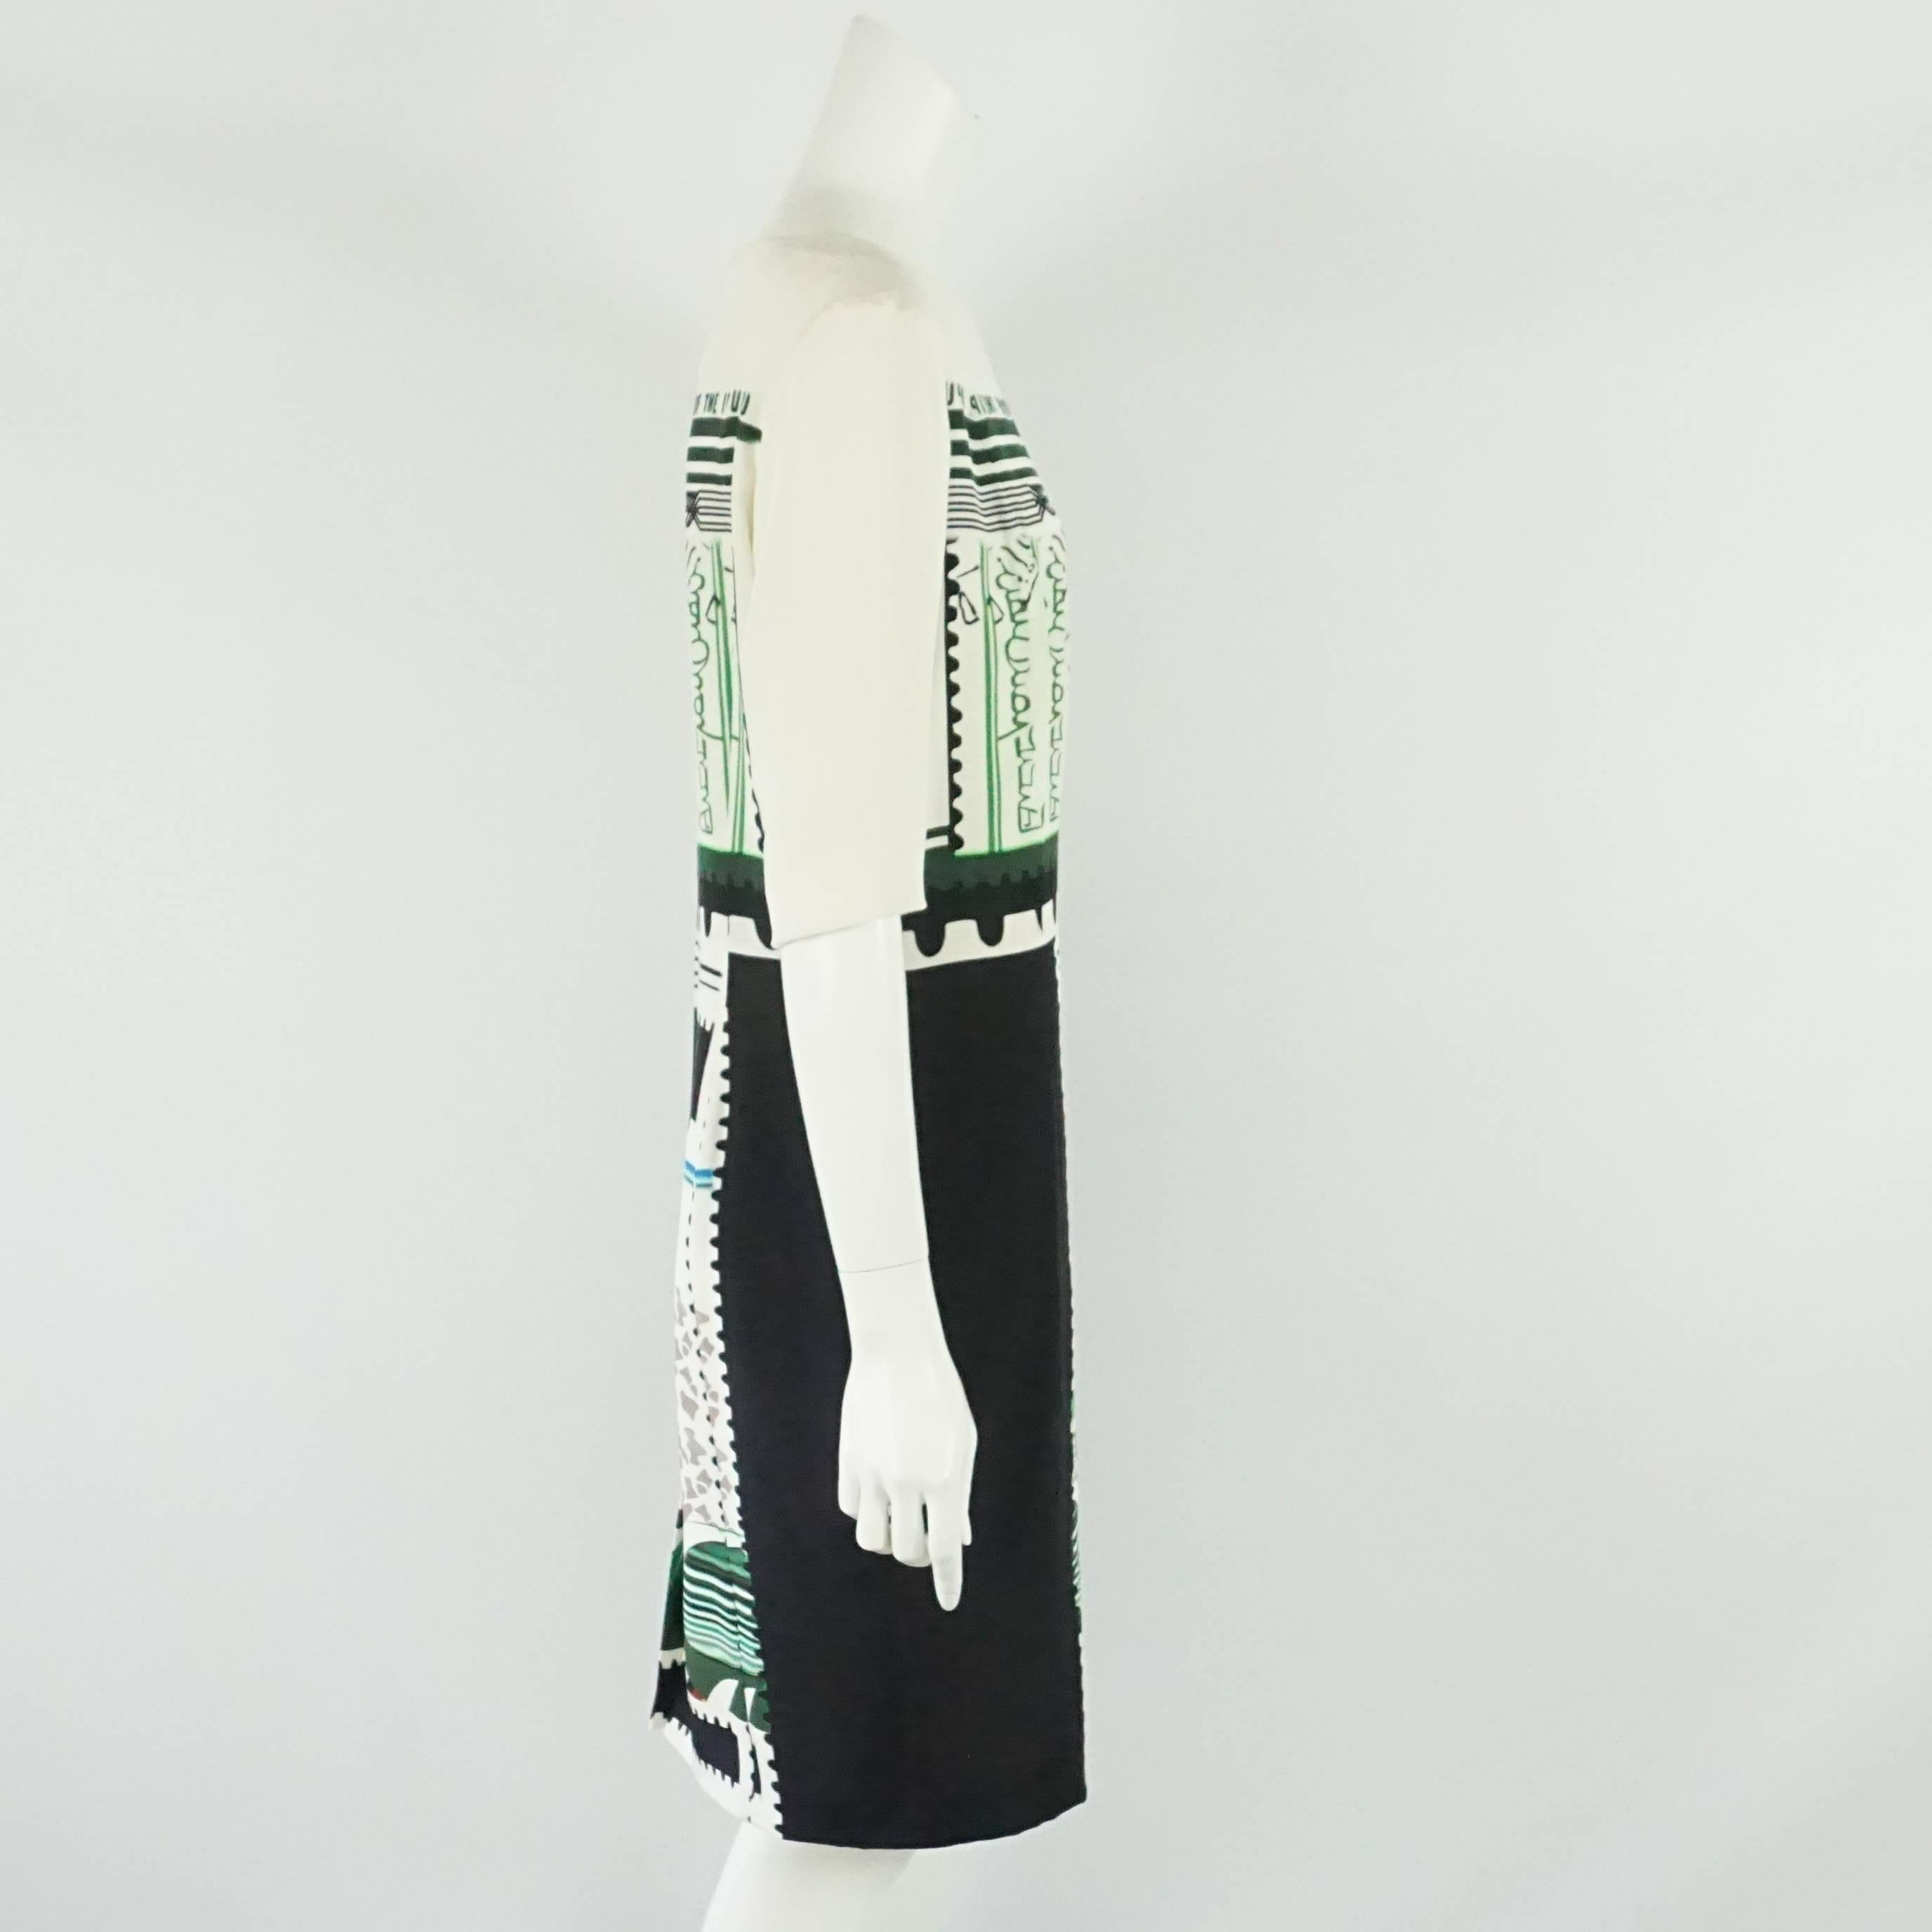 Mary Katrantzou Black and White Silk Printed Shift Dress - 14. This beautiful dress adds a little flare to the a classic style. It has 3/4 sleeves with a slightly fitted bodice and a small back slit. The dress is in good condition with a couple